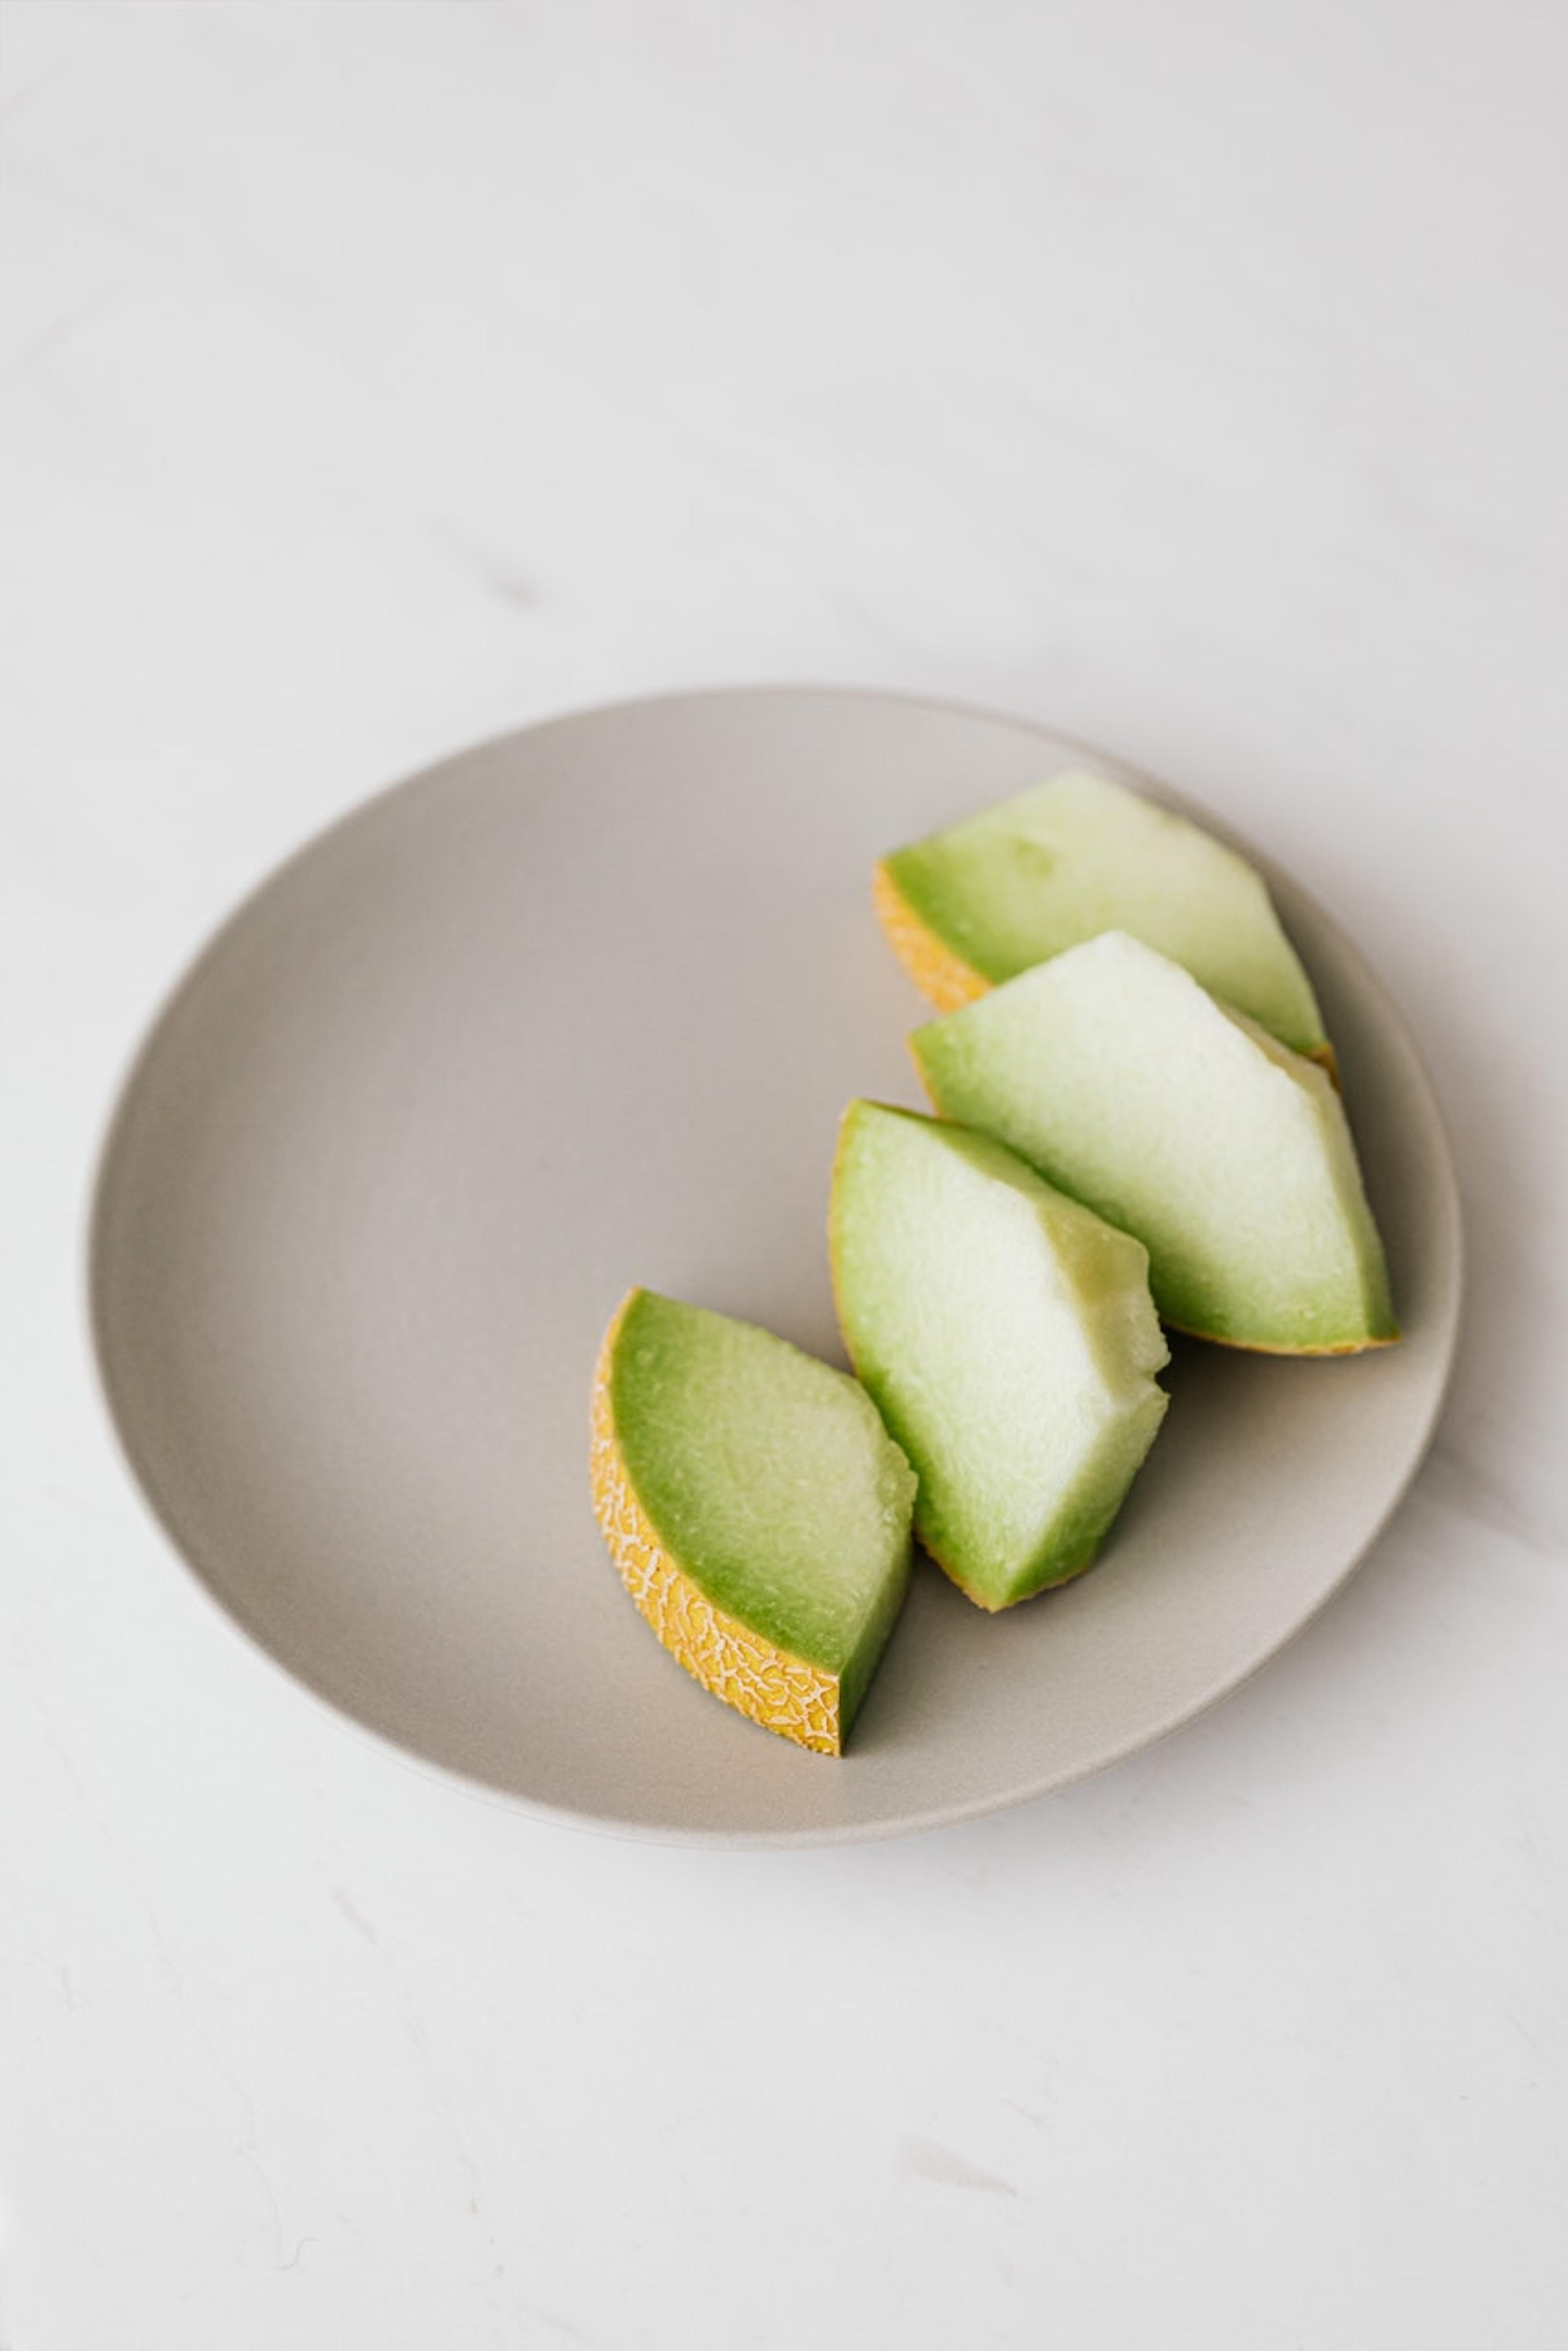 A gray plate with some slices of honeydew melon across part of it